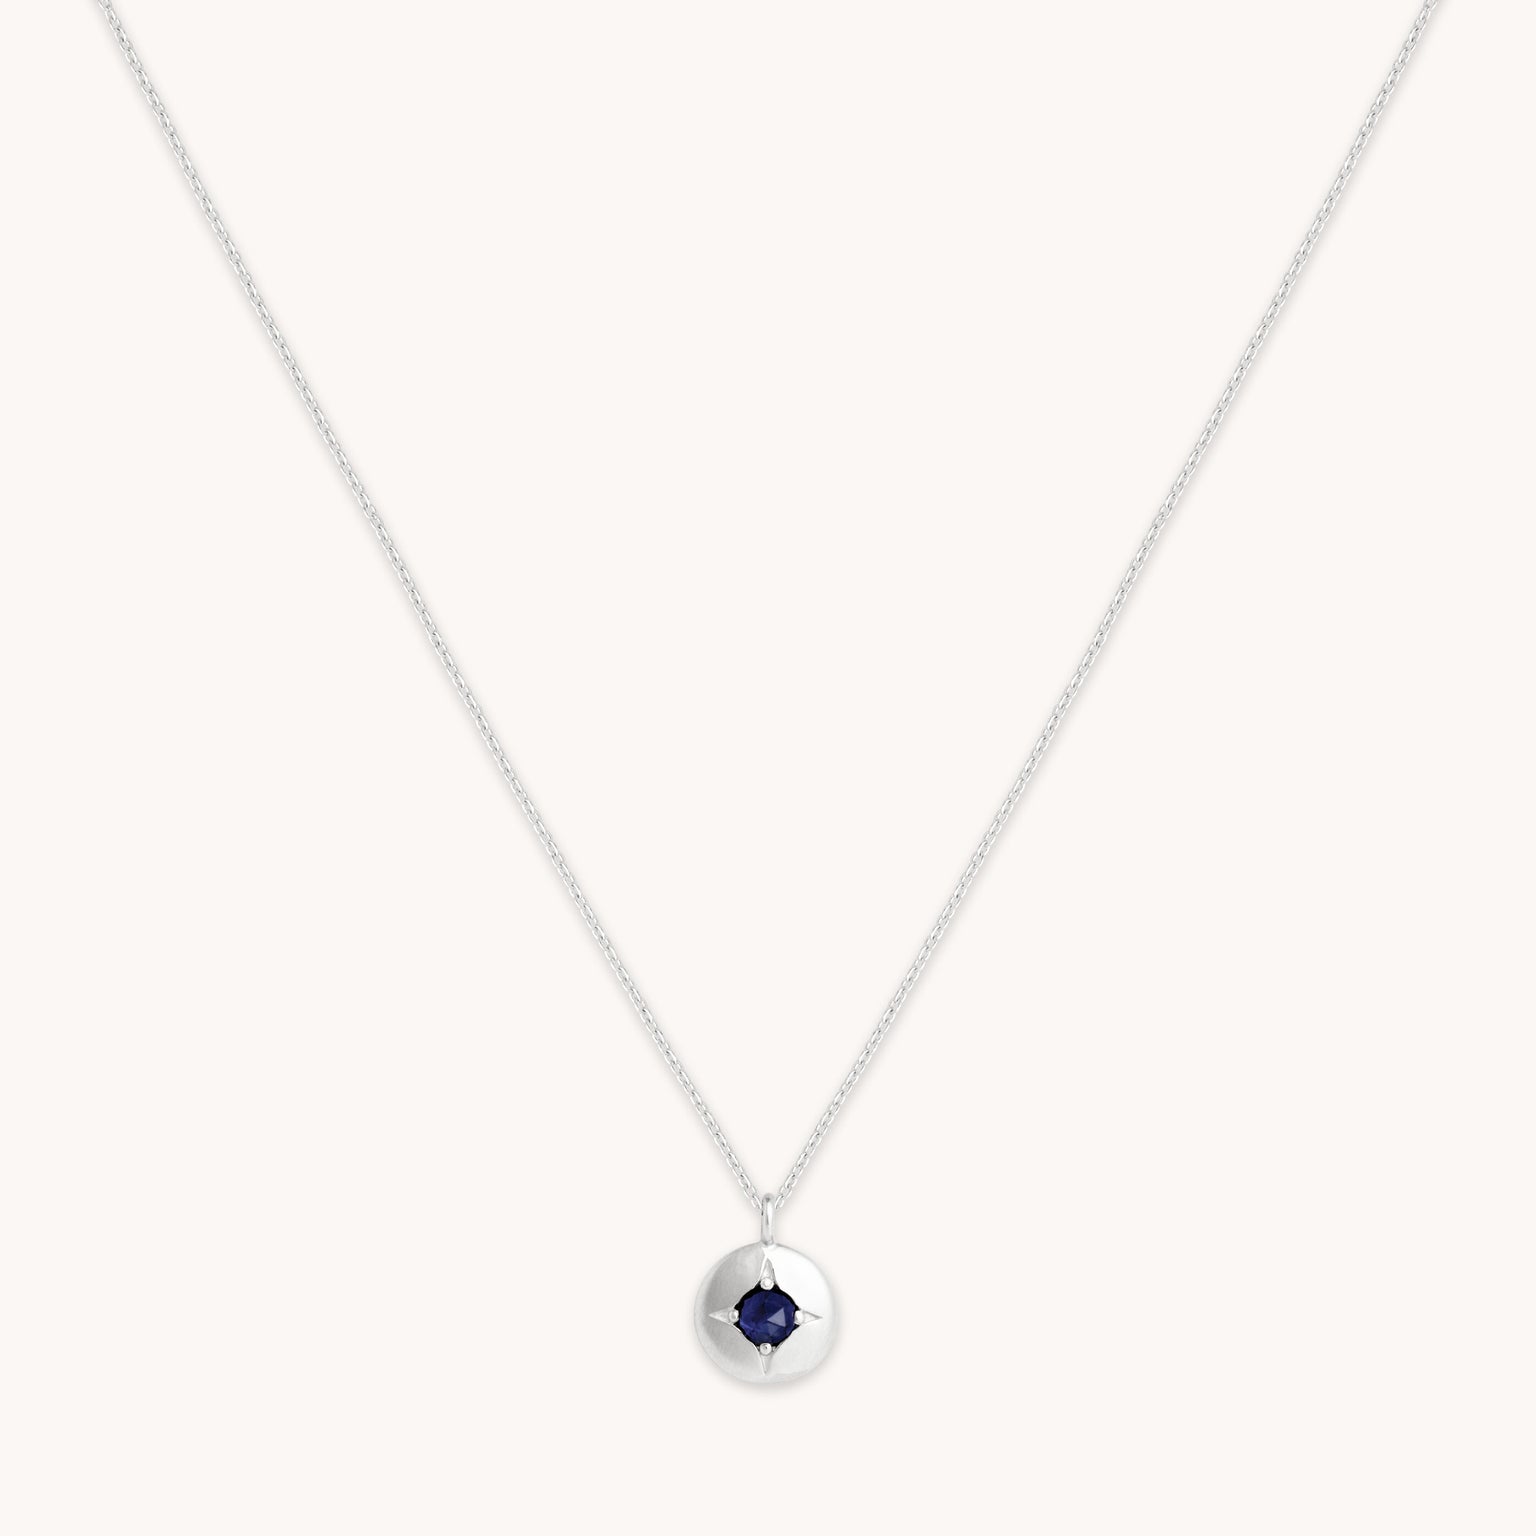 September Sapphire Birthstone Necklace in Solid White Gold